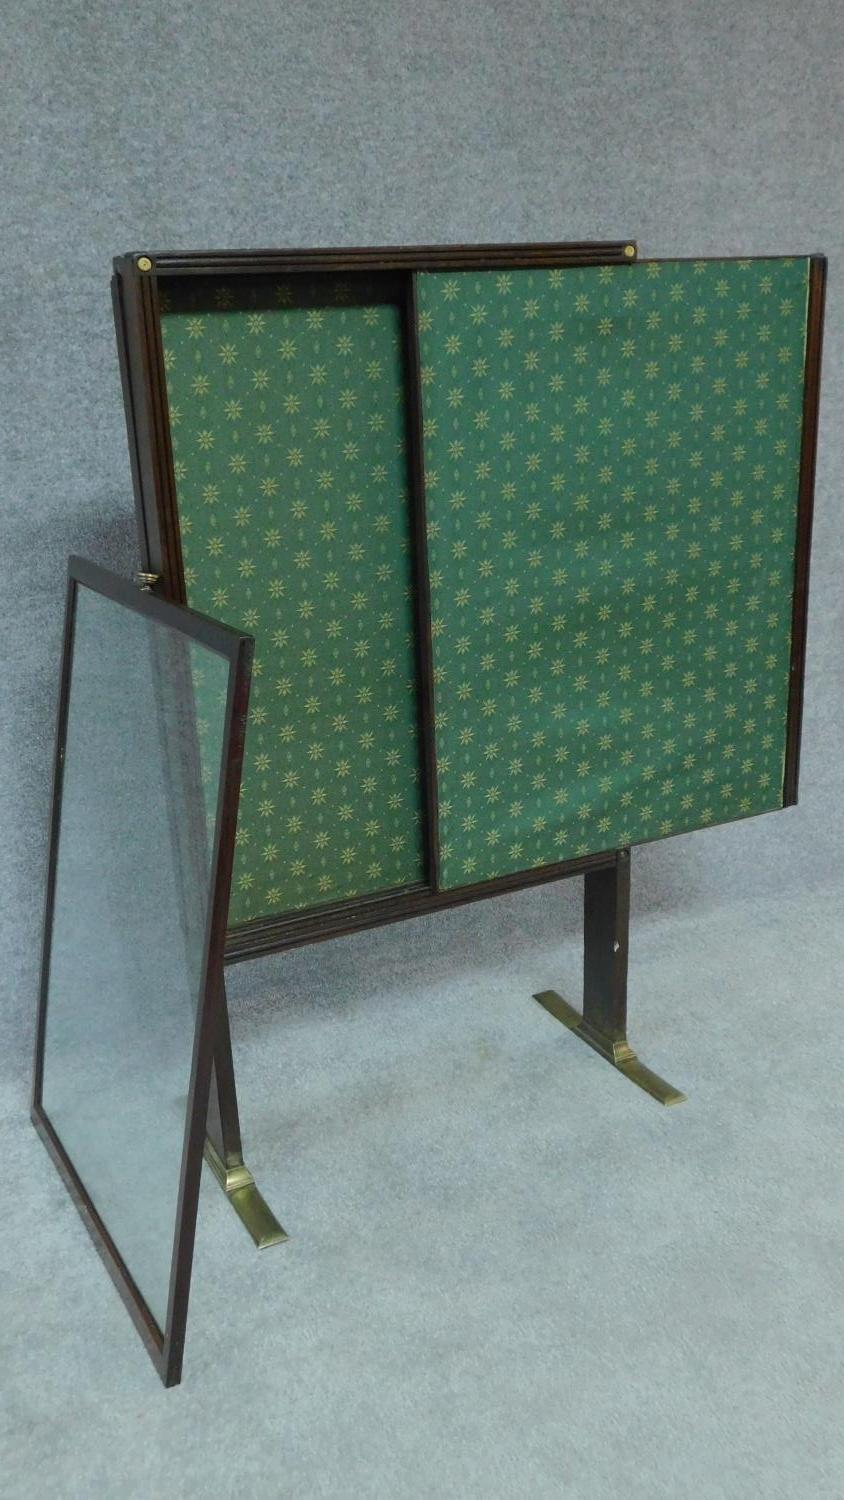 A Regency mahogany fire screen with sliding panels and central glazed drop in section on brass - Image 4 of 6